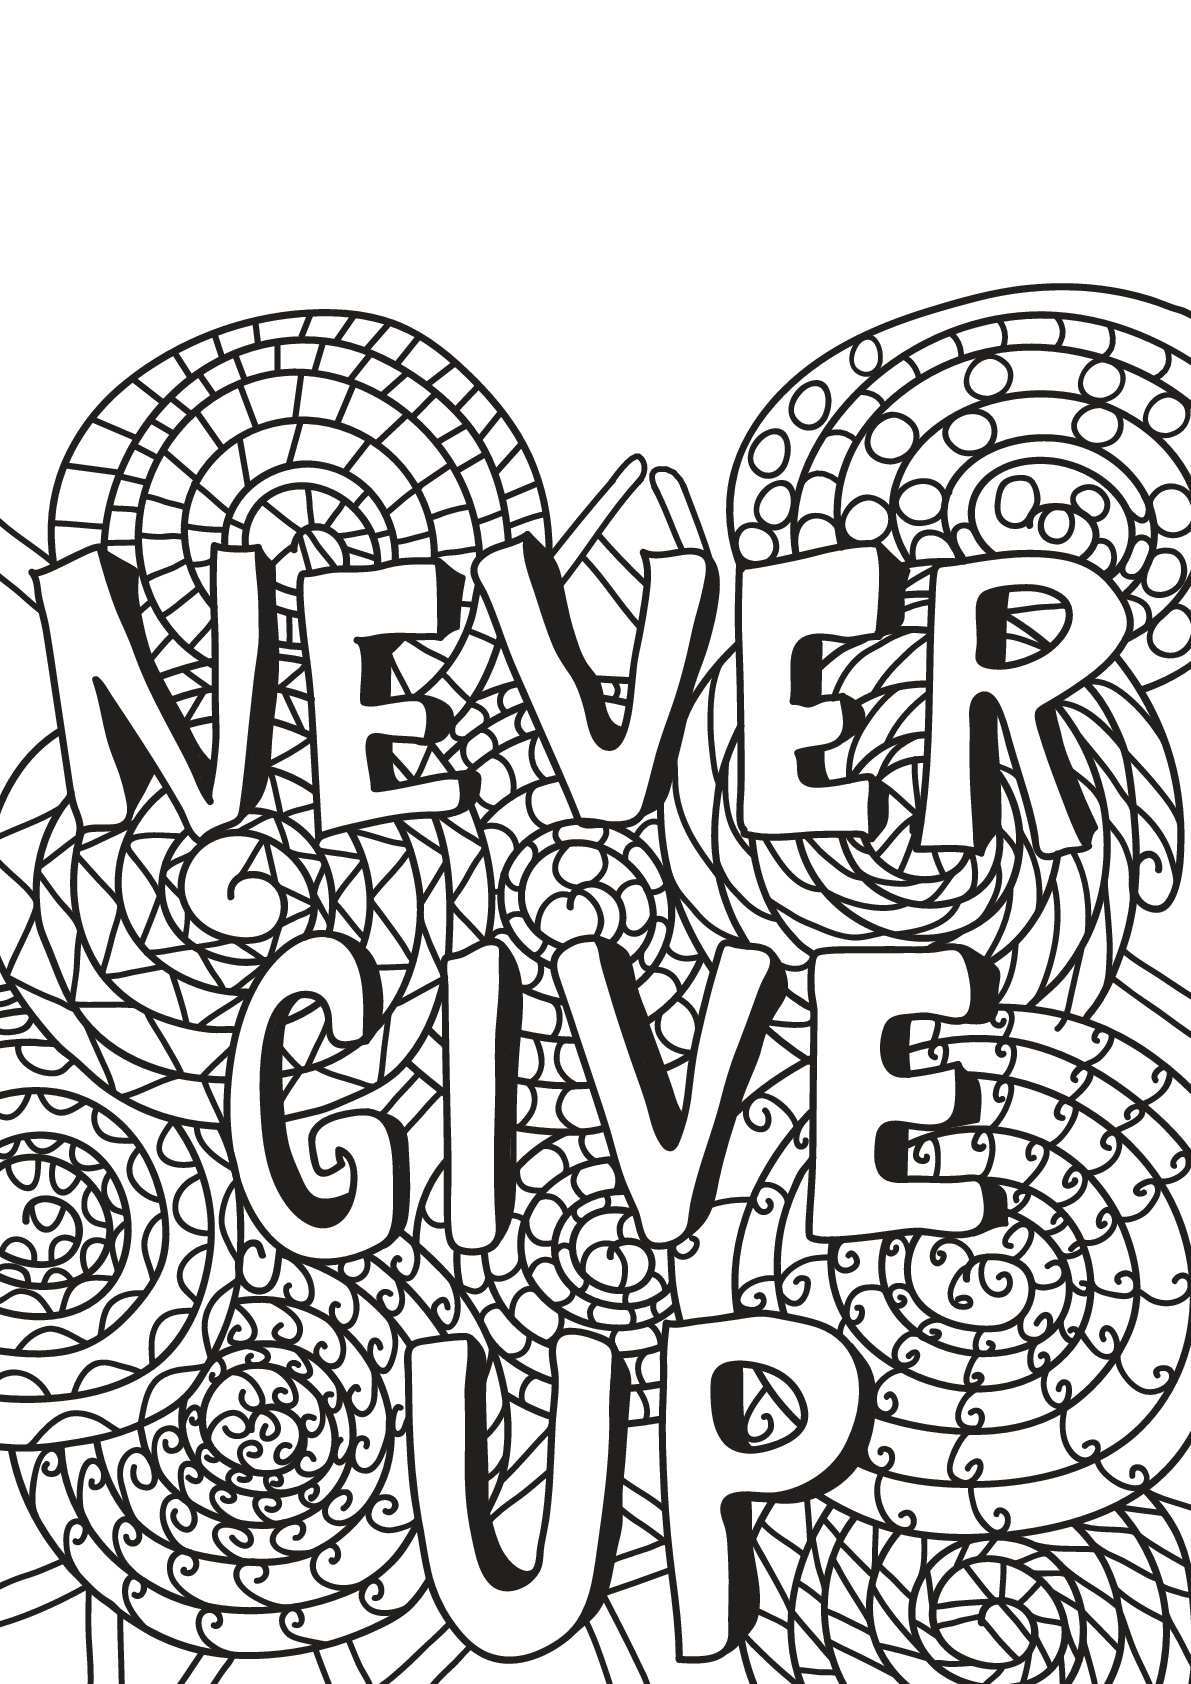 Download Free Book Quote 14 Positive Inspiring Quotes Adult Coloring Pages